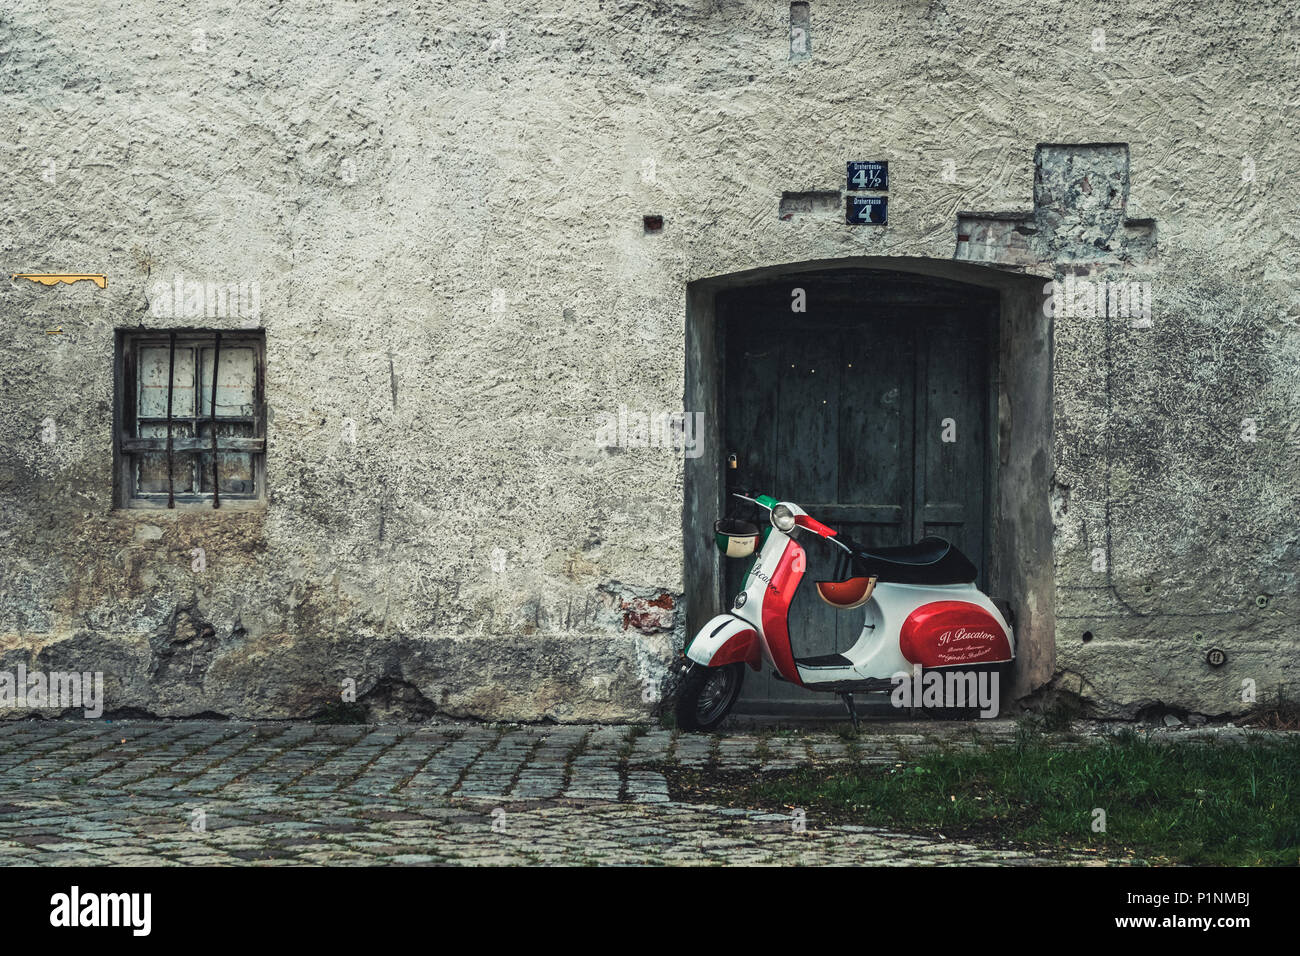 Füssen, Germany - May 10, 2018: Classic red white and green colored Piaggio Vespa scooter motorcycle standing on a cobblestone covered street at the d Stock Photo